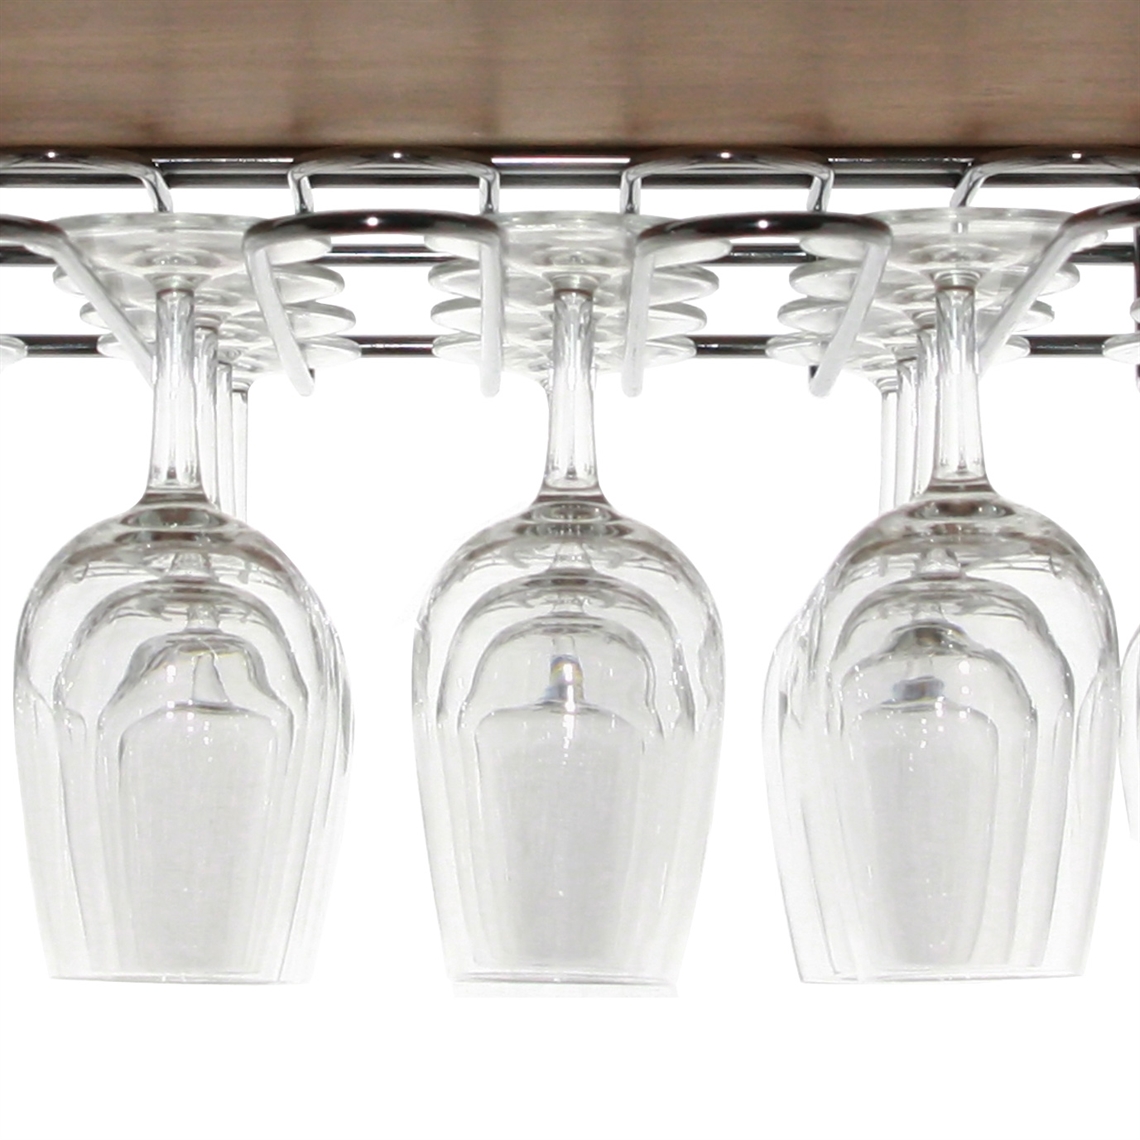 View more glass washer racks & trays from our Wine Glass Hanging Racks range